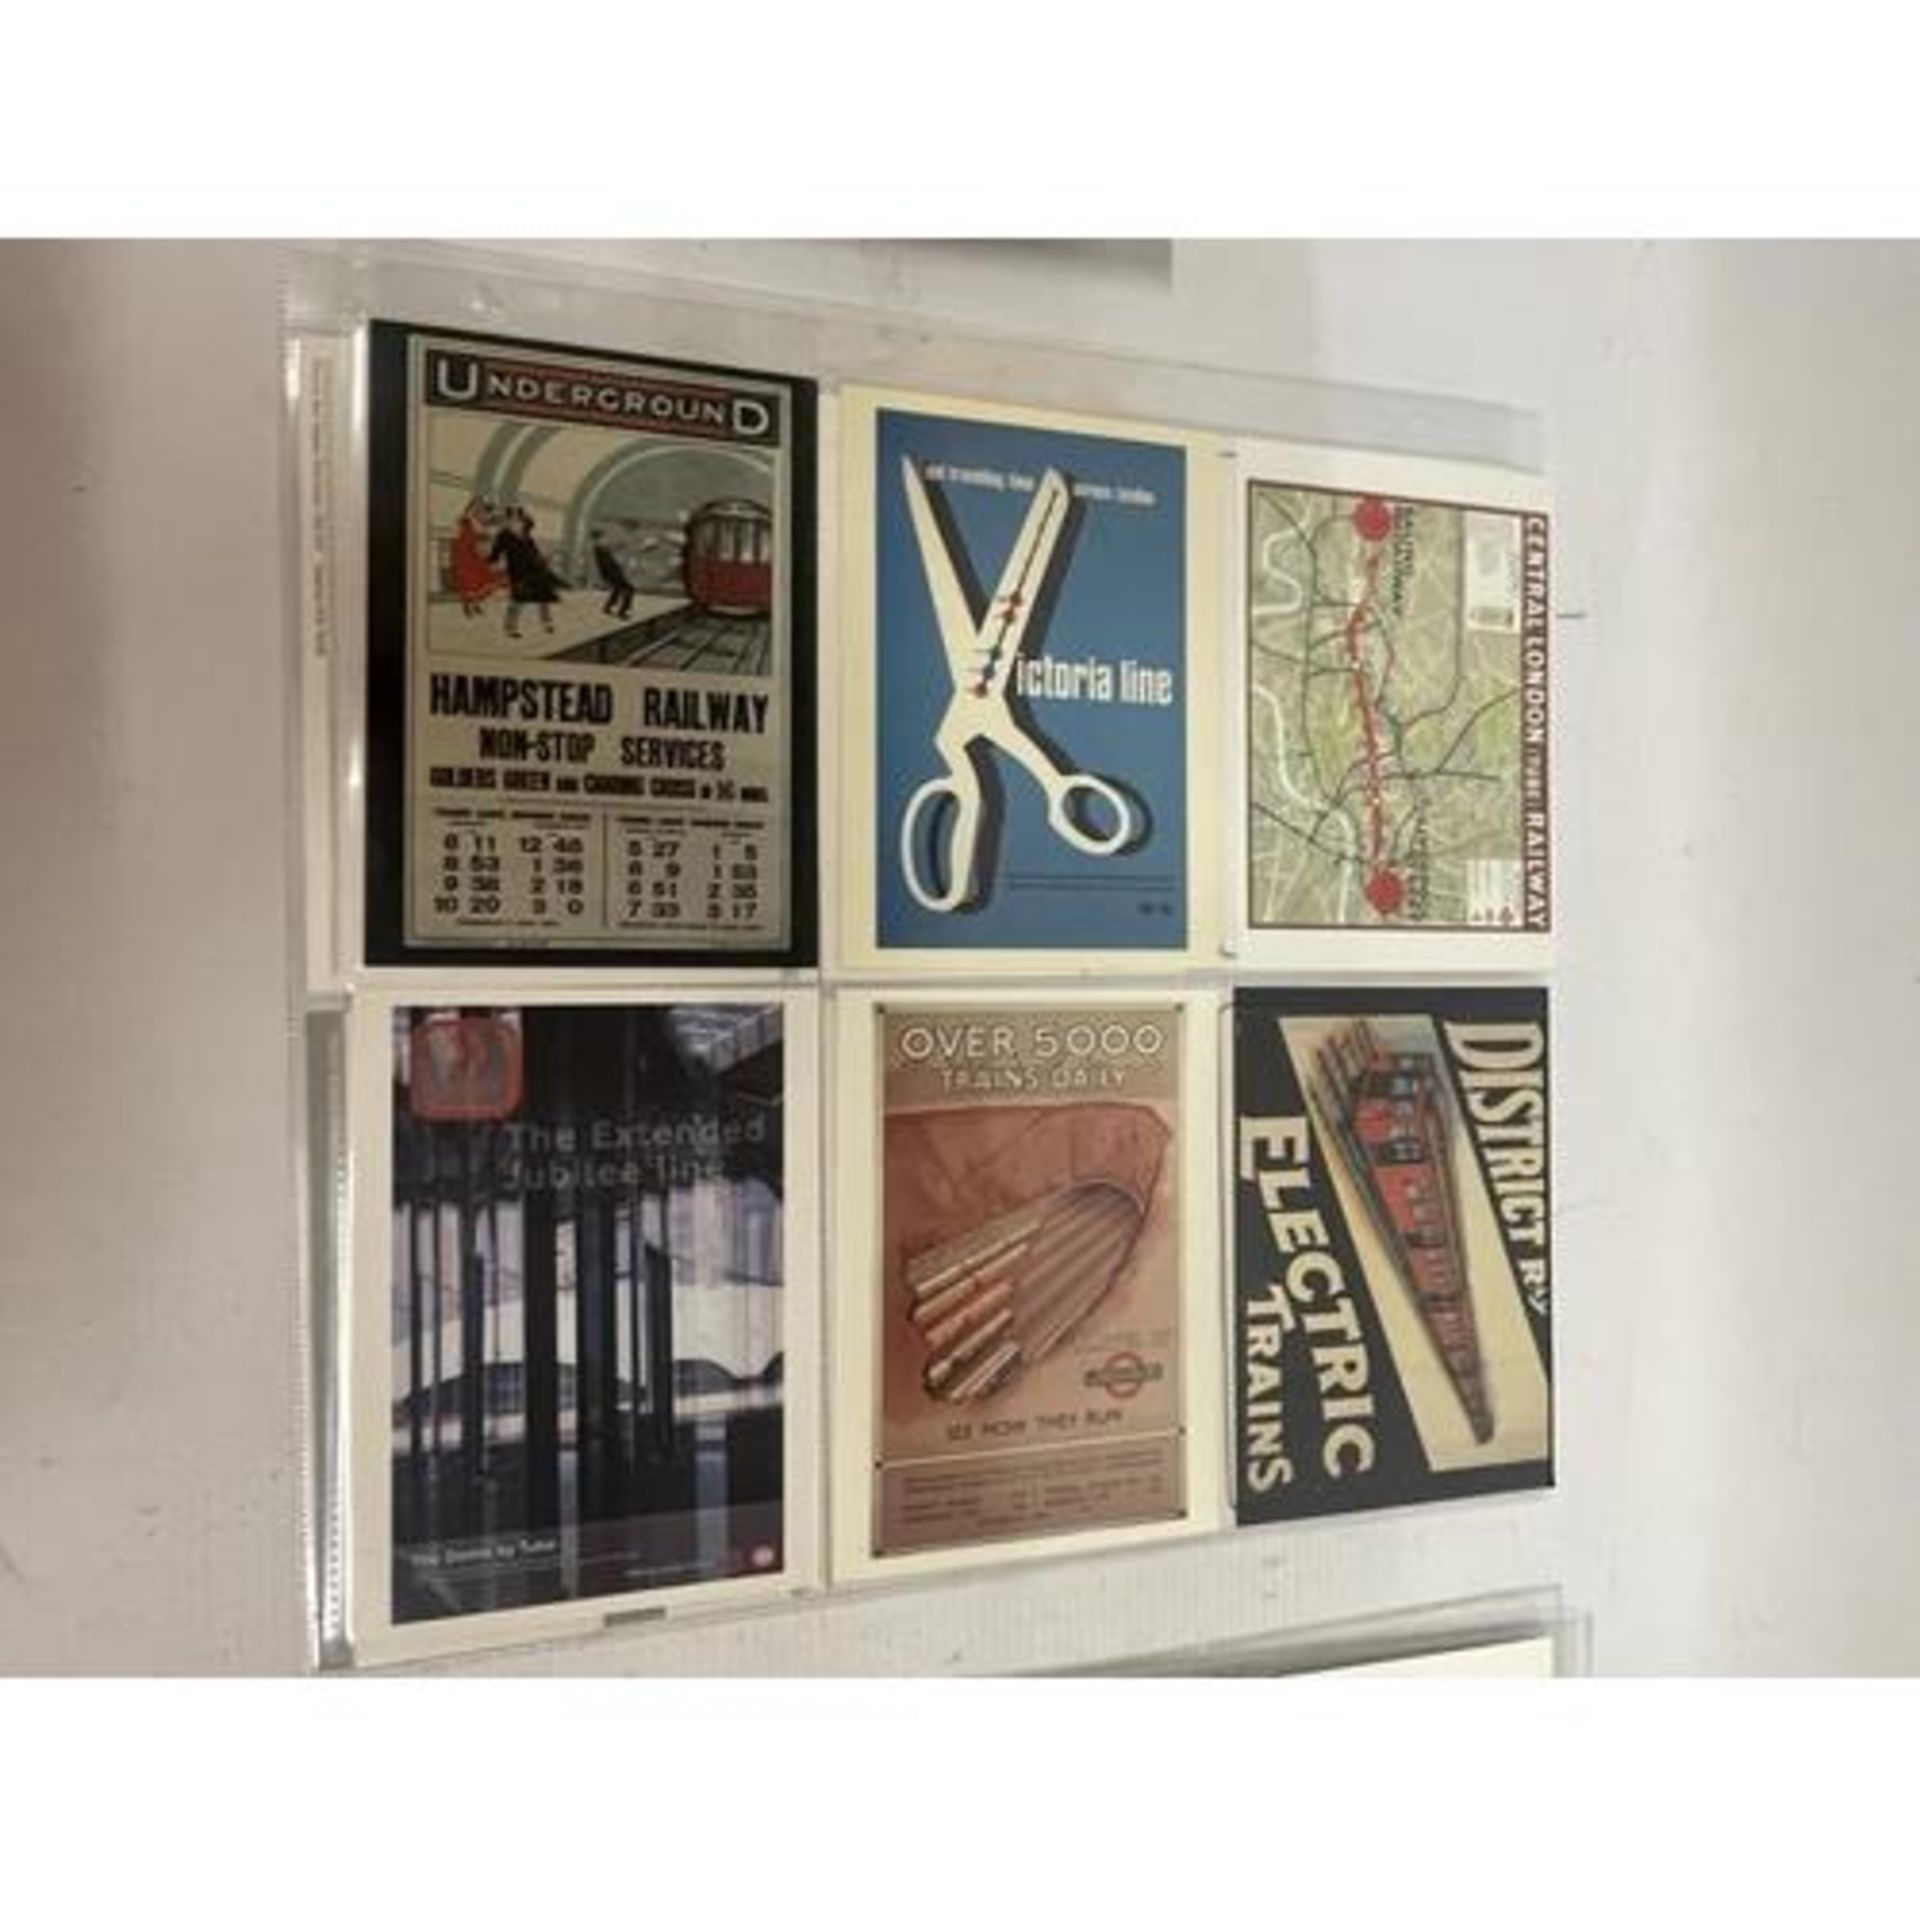 APPROXIMATELY 380 POSTCARDS RELATING TO BUSES, TRAMS, TROLLEY BUSES, UNDERGROUND,METROPOLITAN AND - Image 5 of 5